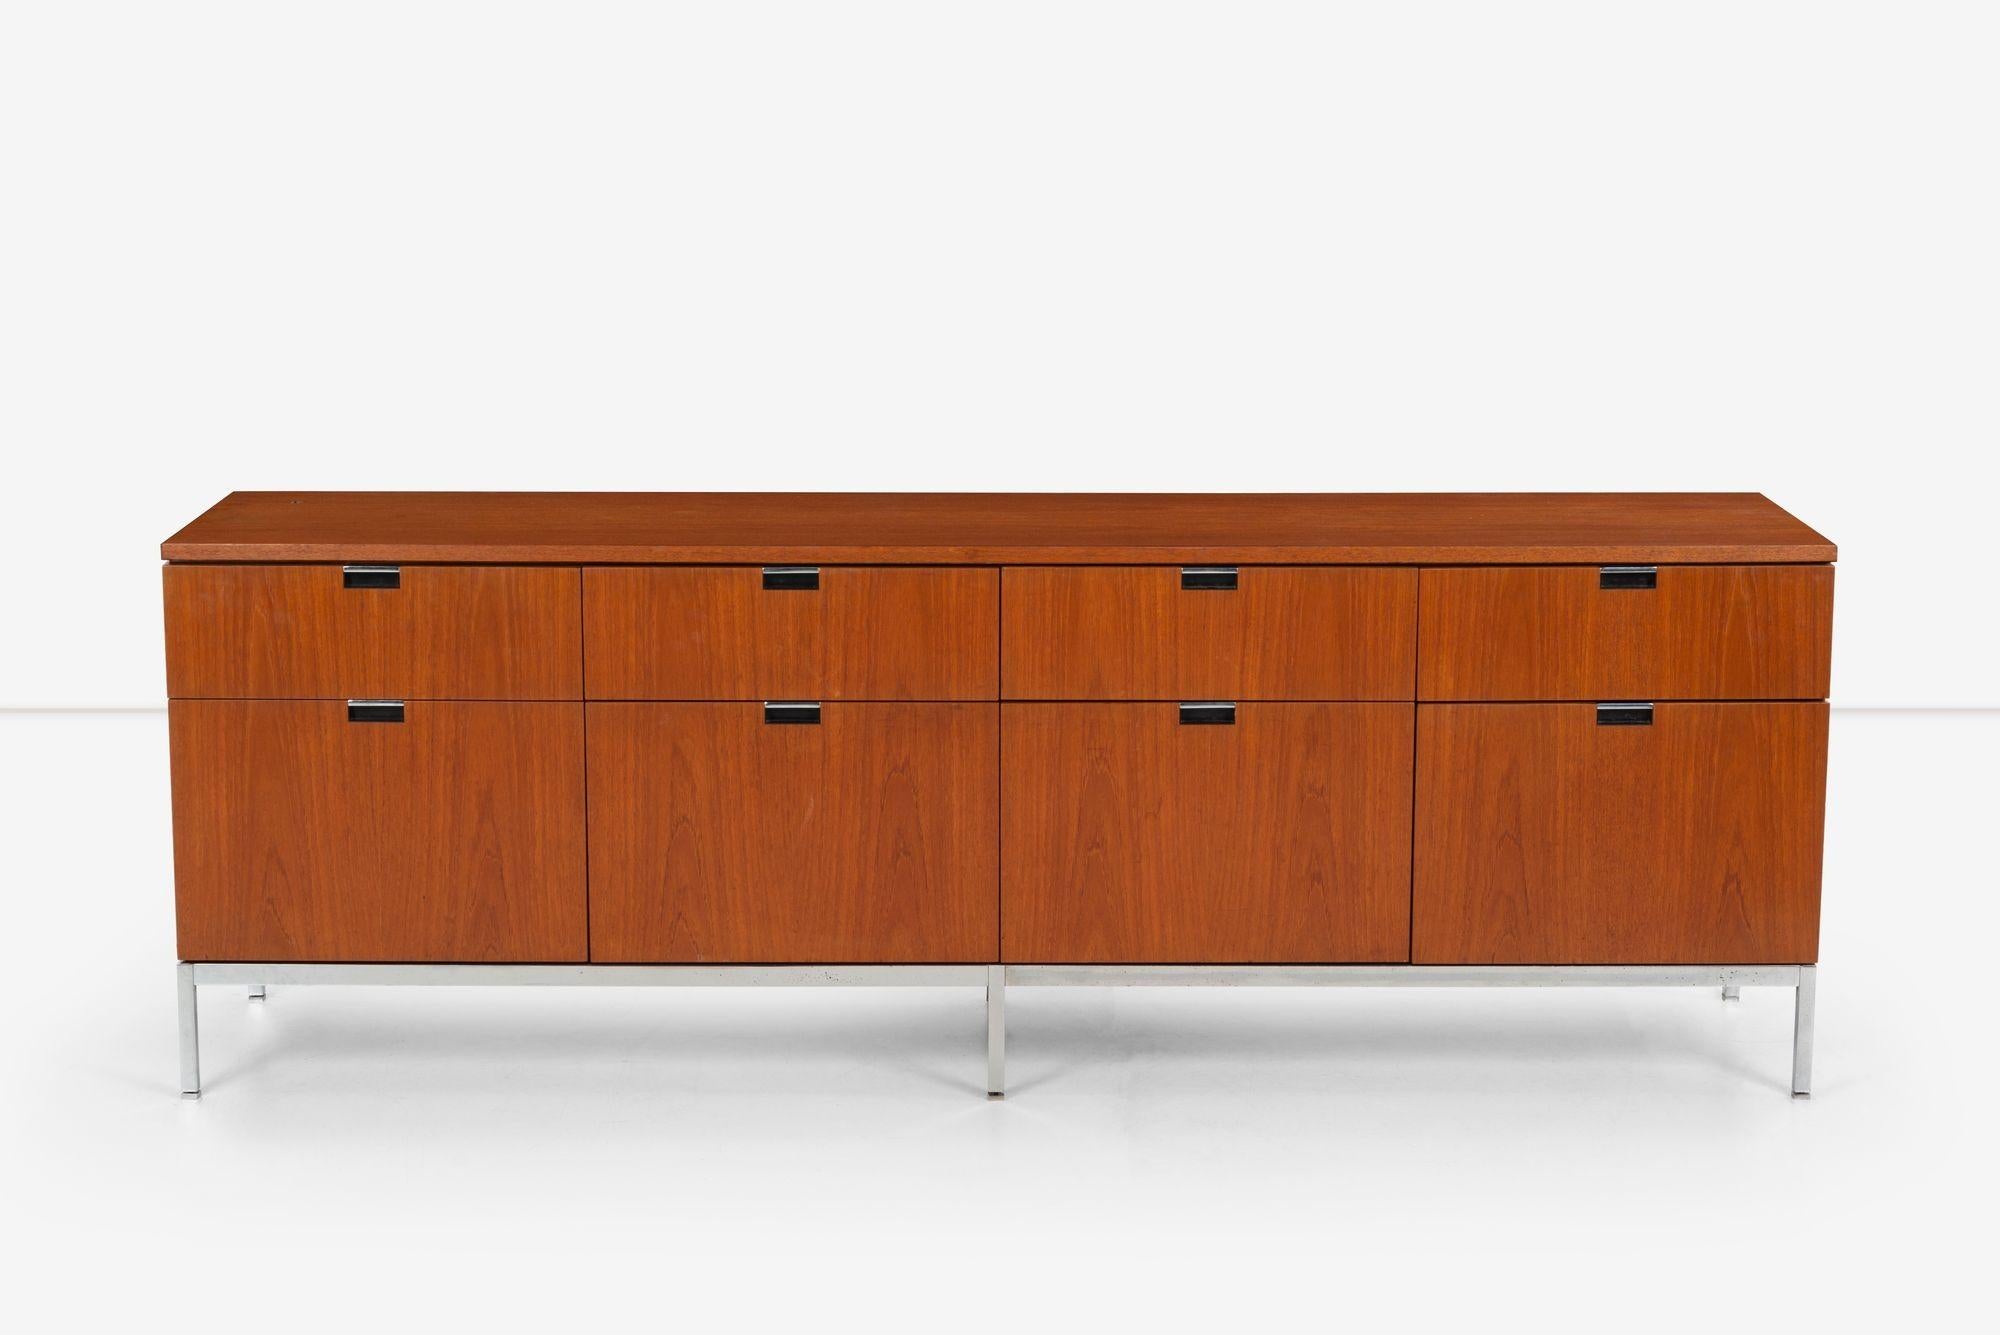 Florence Knoll Eight-Drawer Credenza in Teakwood, features Notch pulls with chrome details, Four file drawers and Four pencil drawers, chrome plated adjustable feet, with lock.
[Knoll label on underside 1976 stamp].